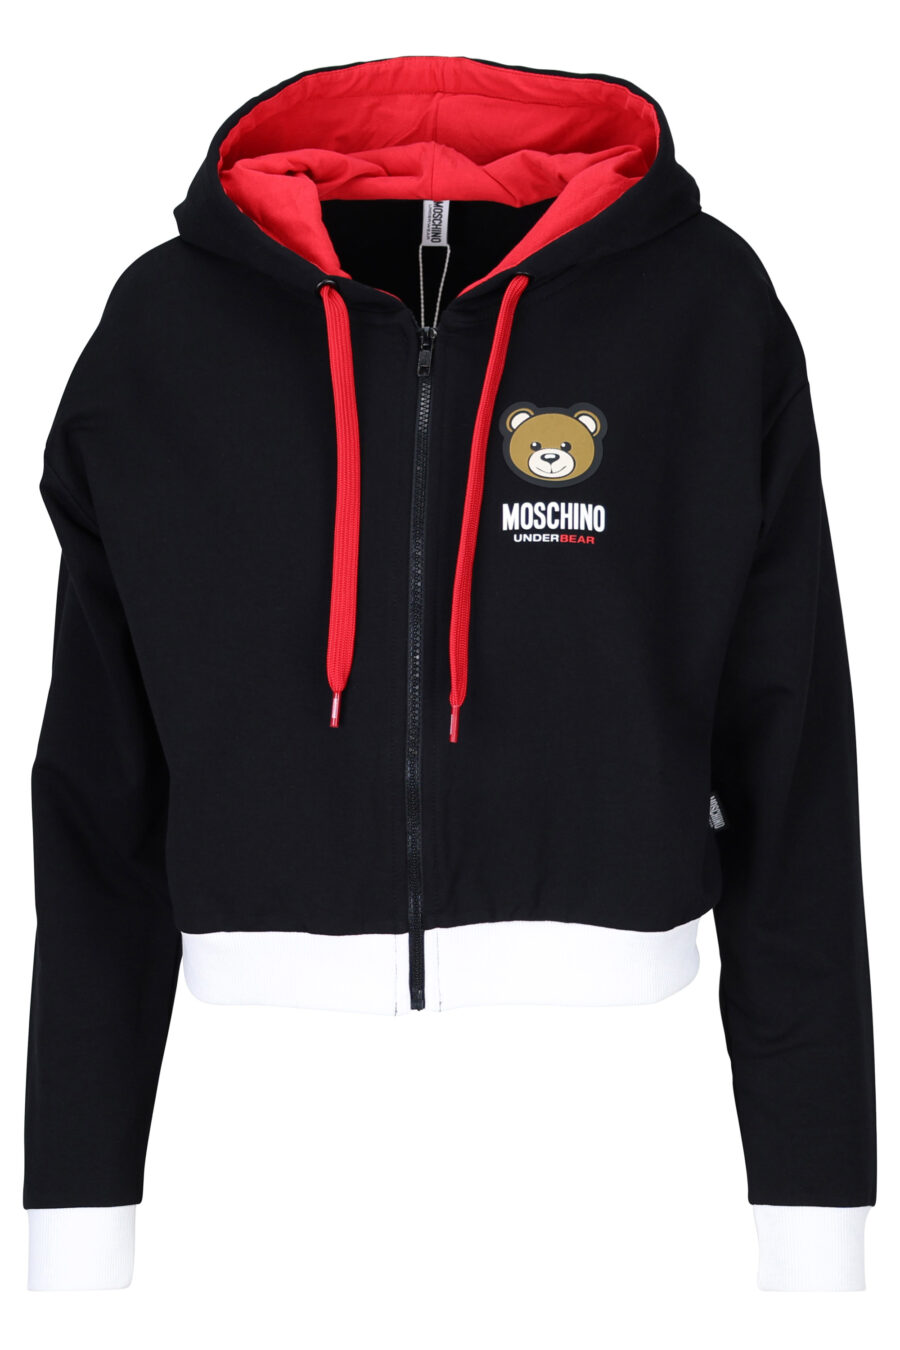 Black and red sweatshirt with hood and bear logo "underbear" patch - 667113064383